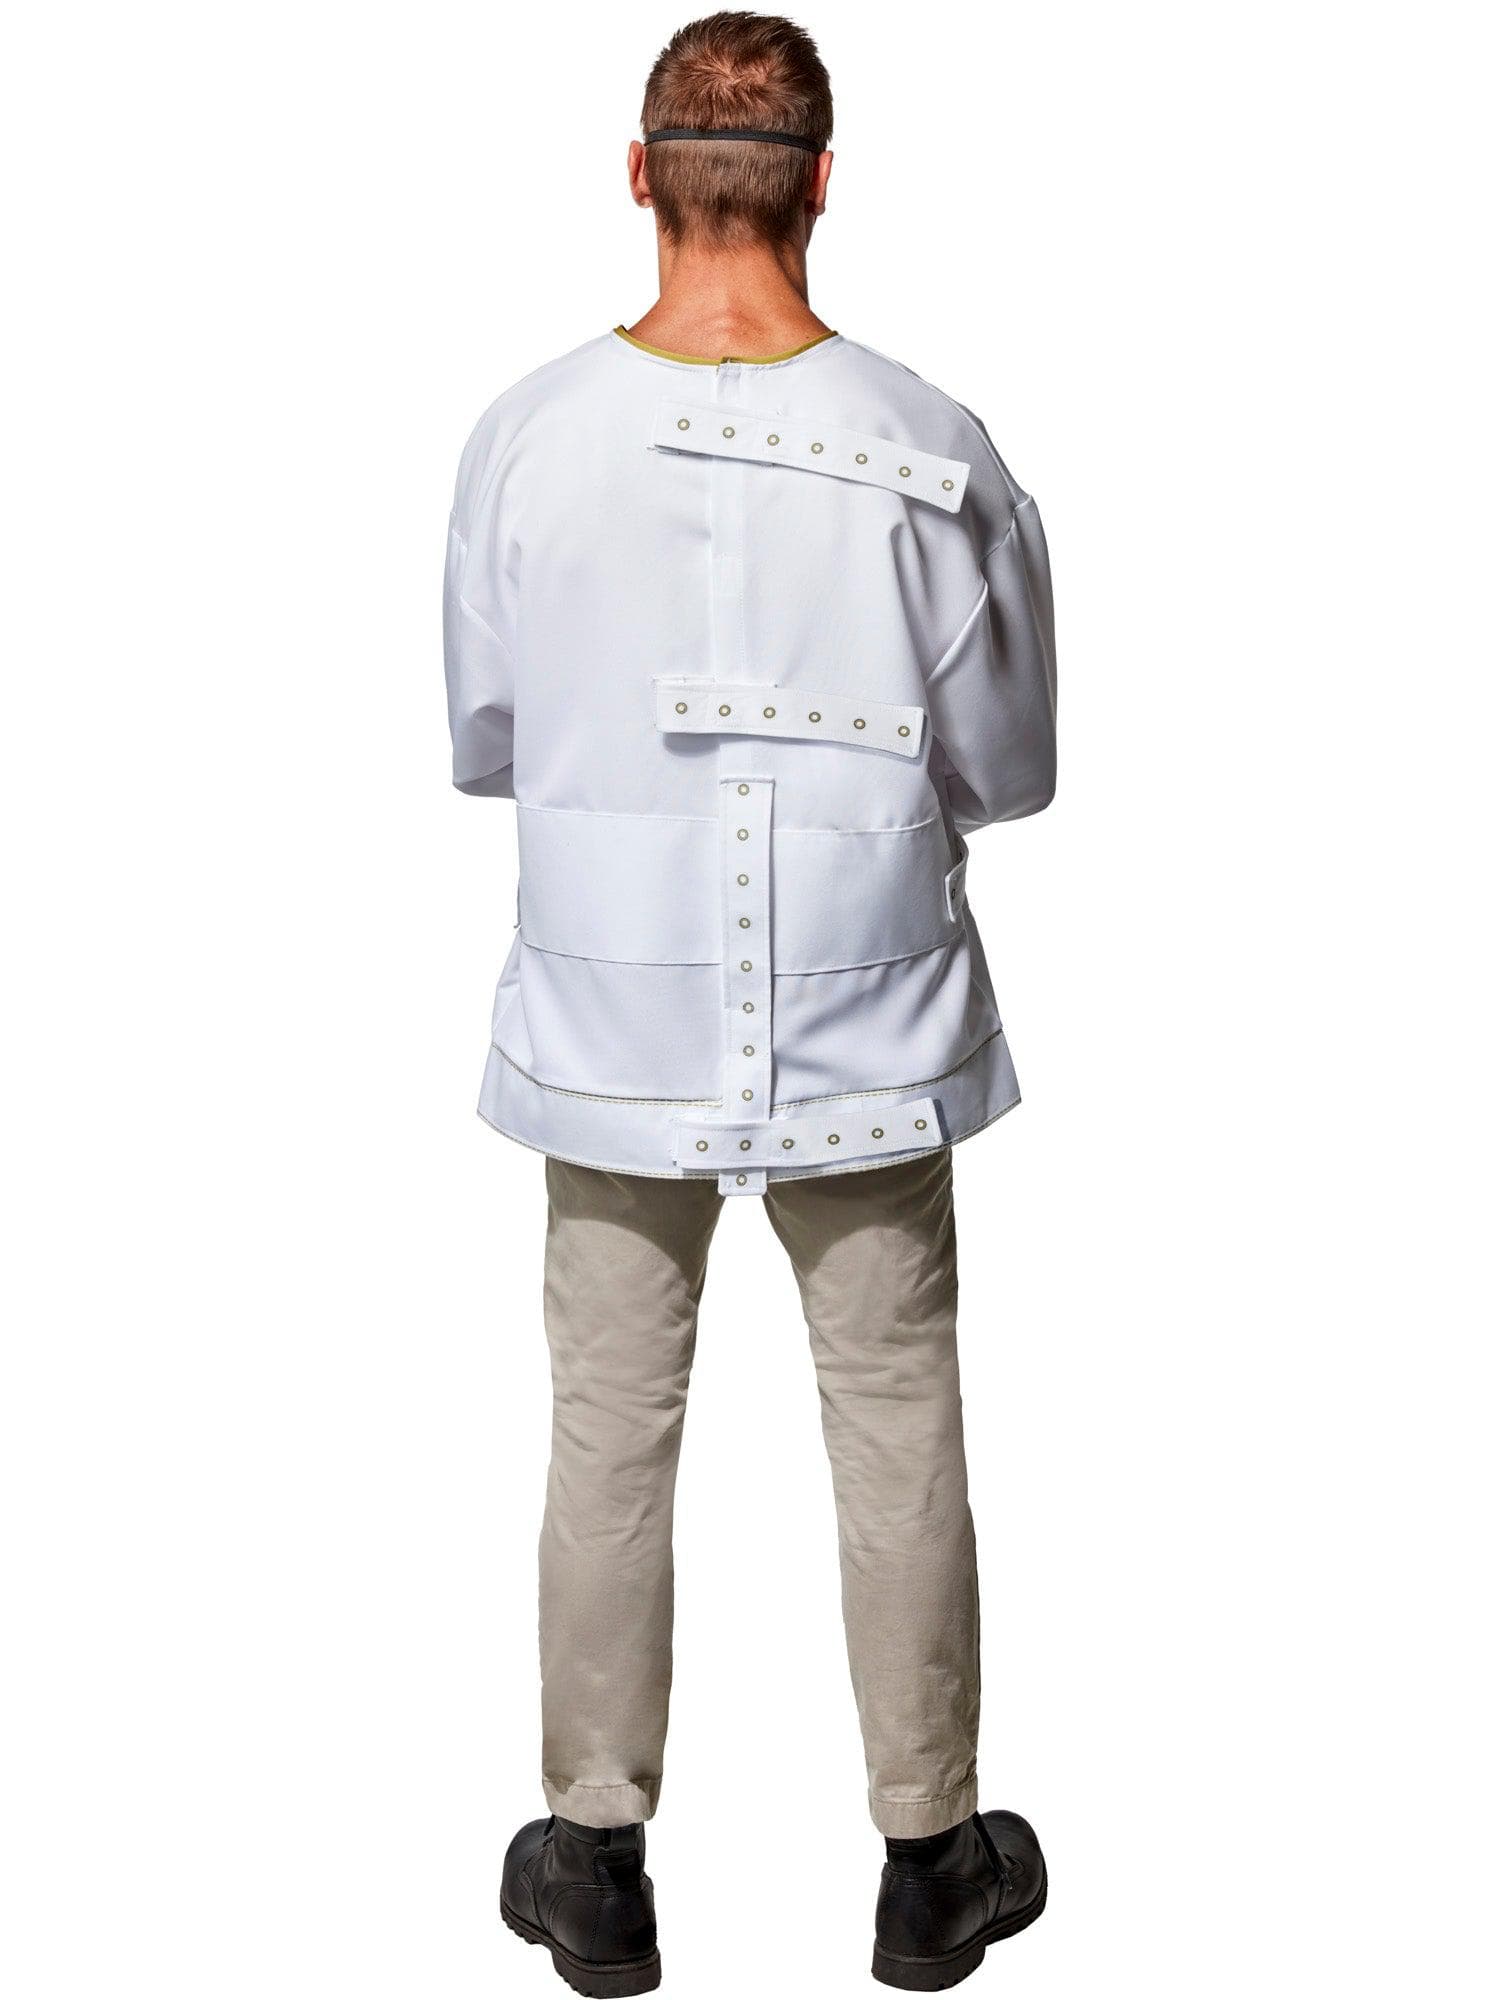 Silence of the Lambs Hannibal Lecter Adult Costume - costumes.com